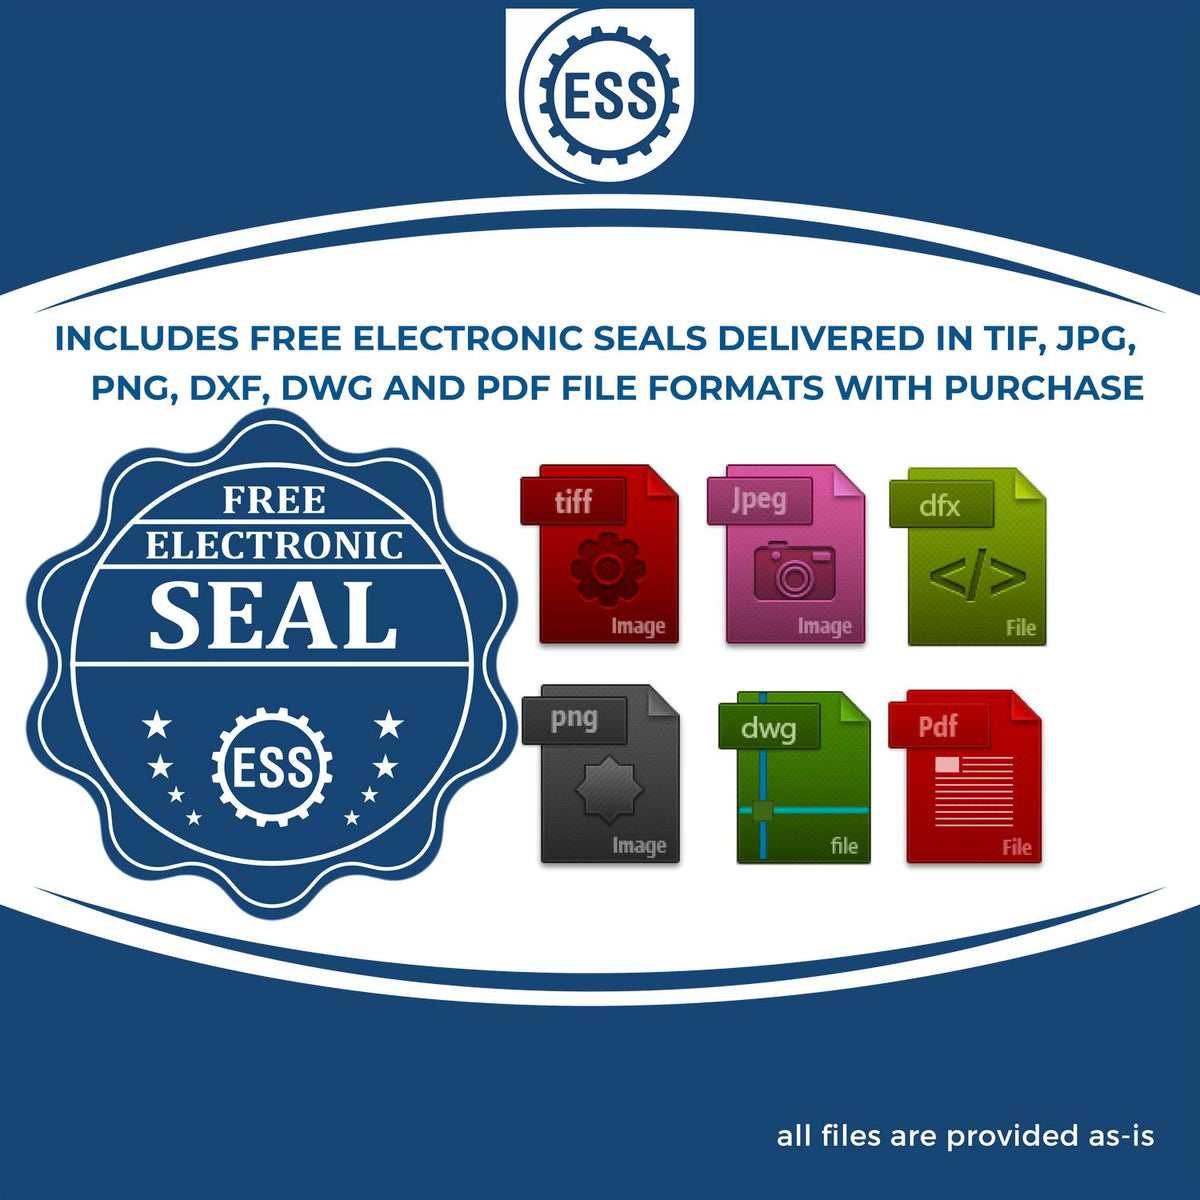 An infographic for the free electronic seal for the Gift Idaho Engineer Seal illustrating the different file type icons such as DXF, DWG, TIF, JPG and PNG.